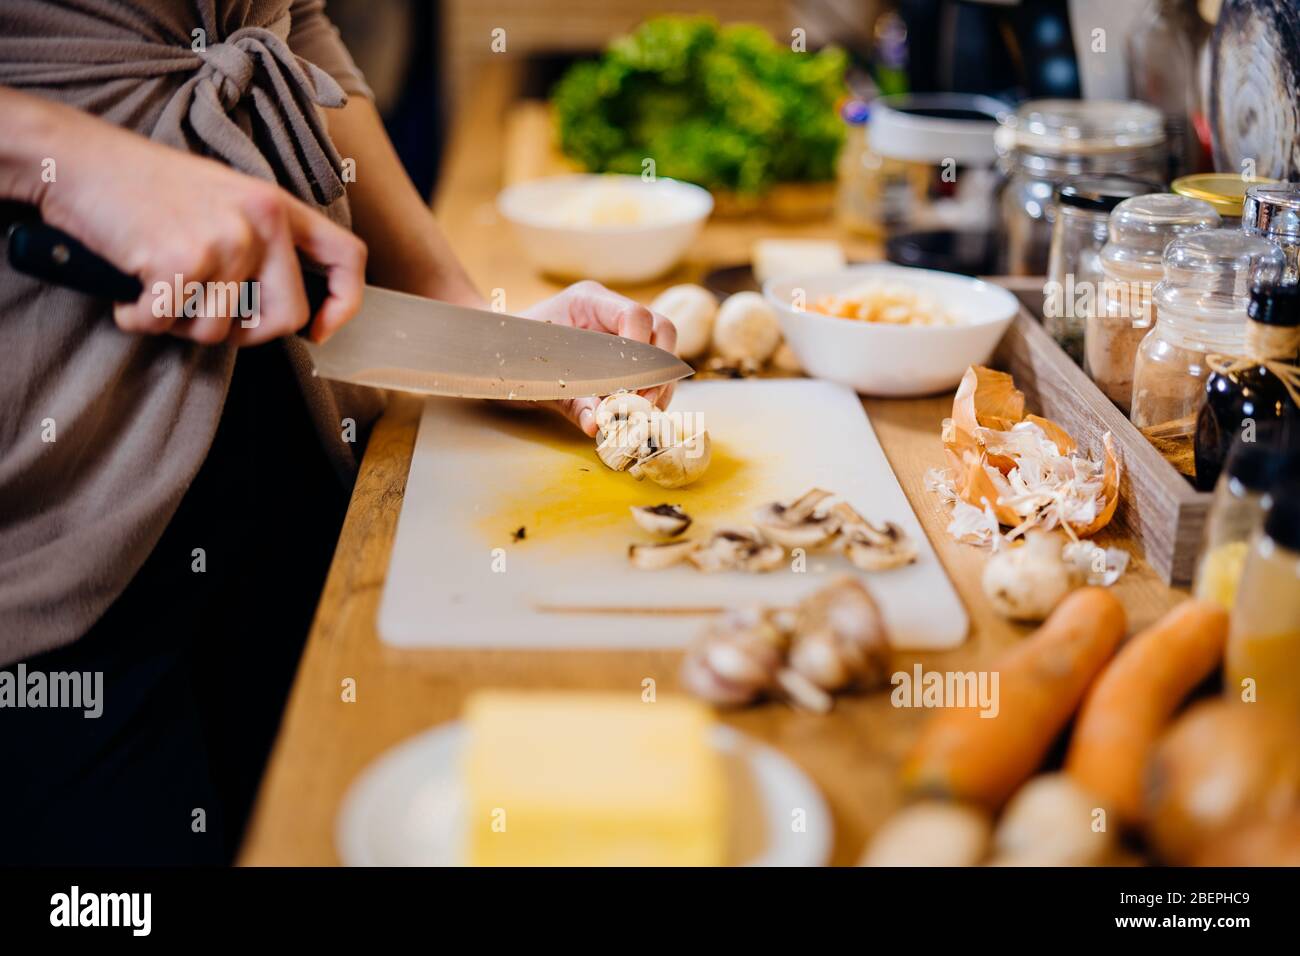 Housewife woman cutting fresh vegetables.Ingredients for cooking food with mushrooms.Healthy food for strong immune system.Health benefits.Preparing v Stock Photo